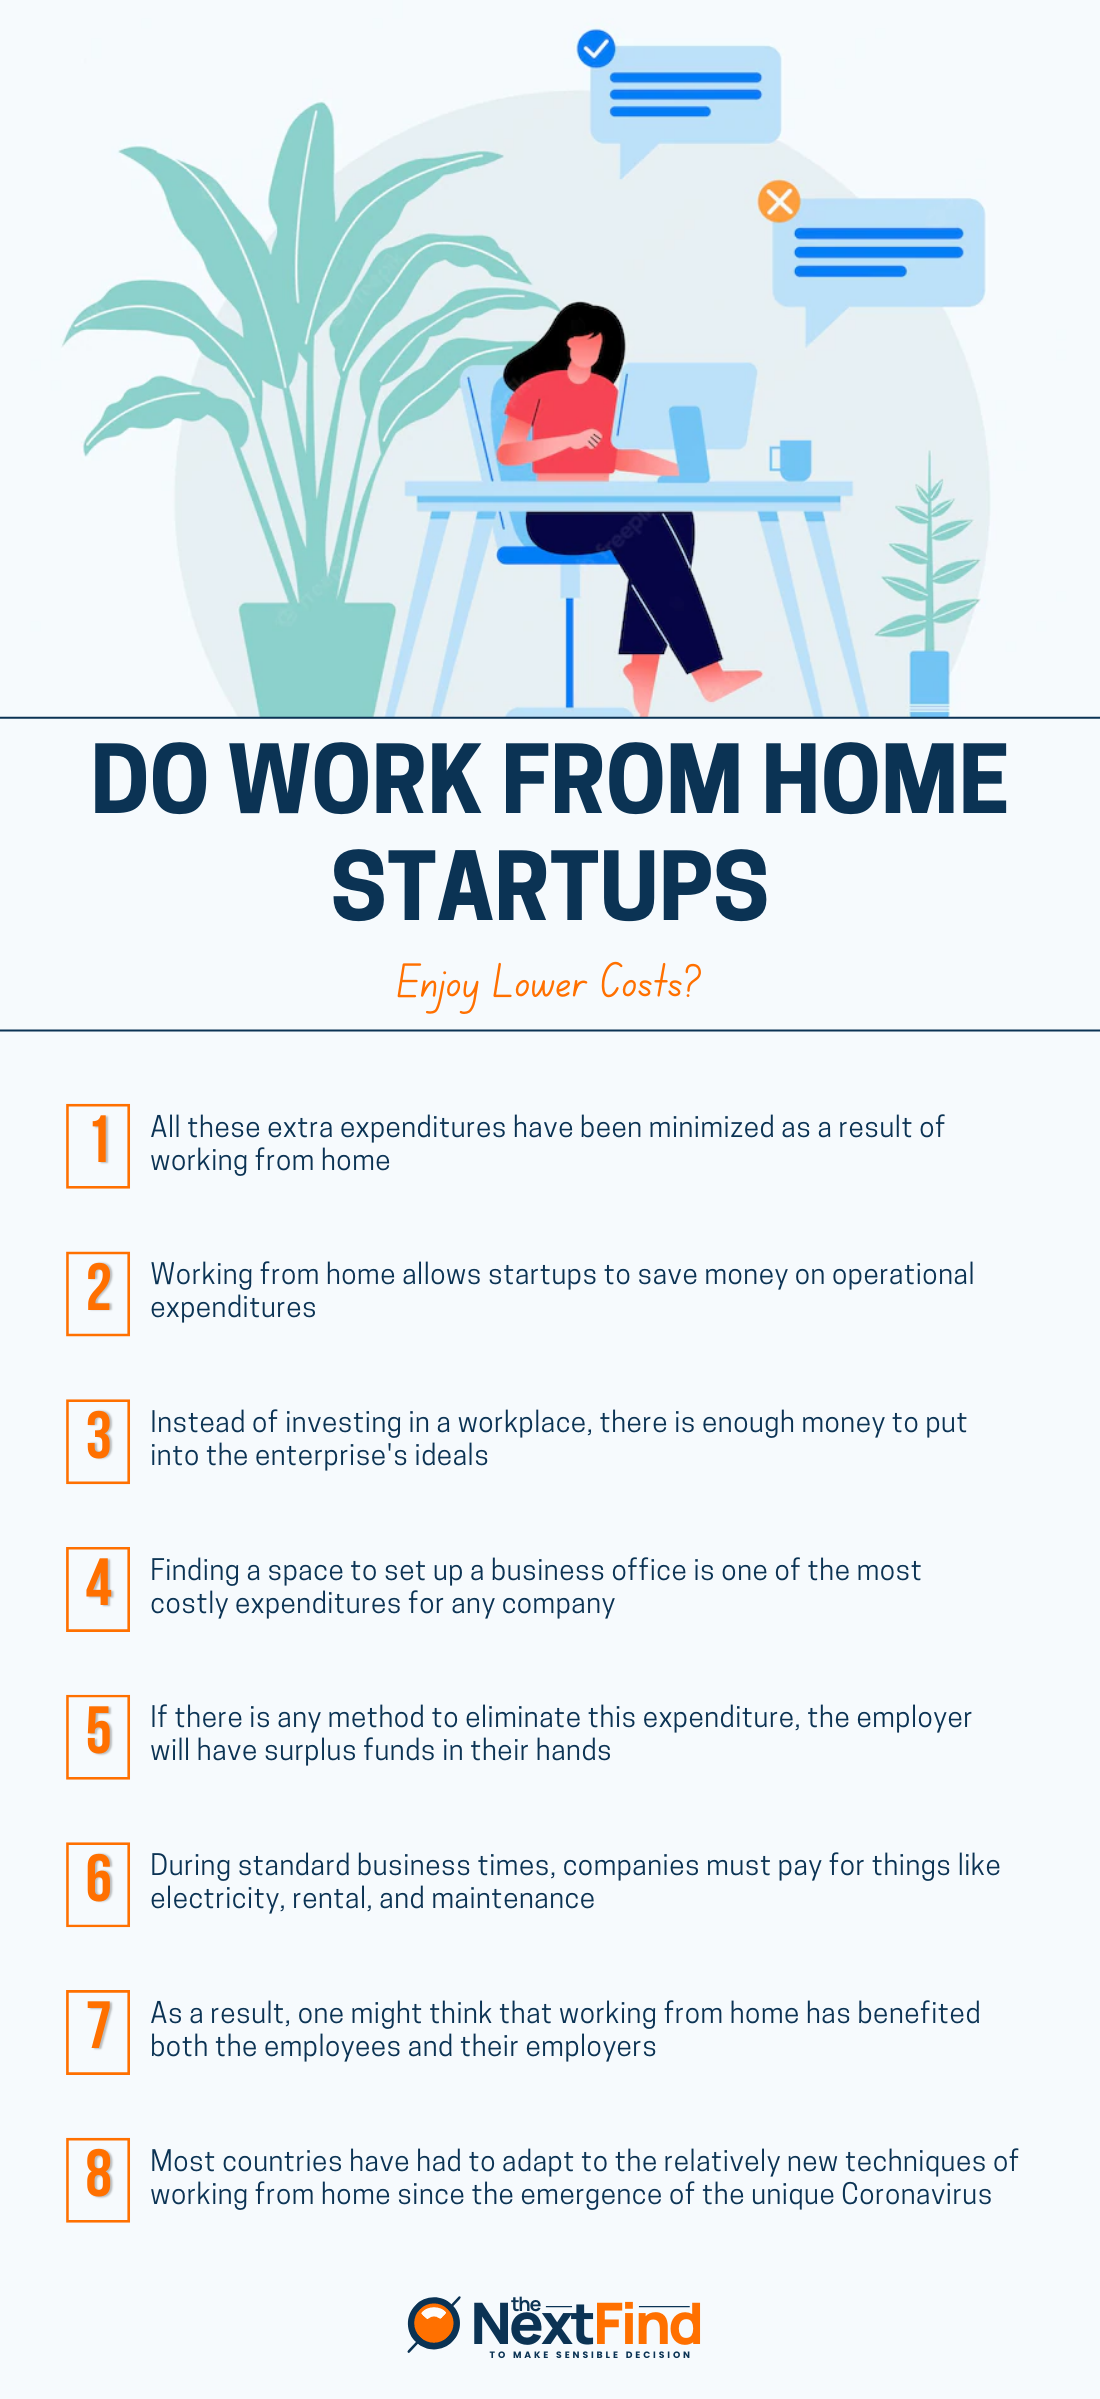 do work from home startups enjoy lower costs